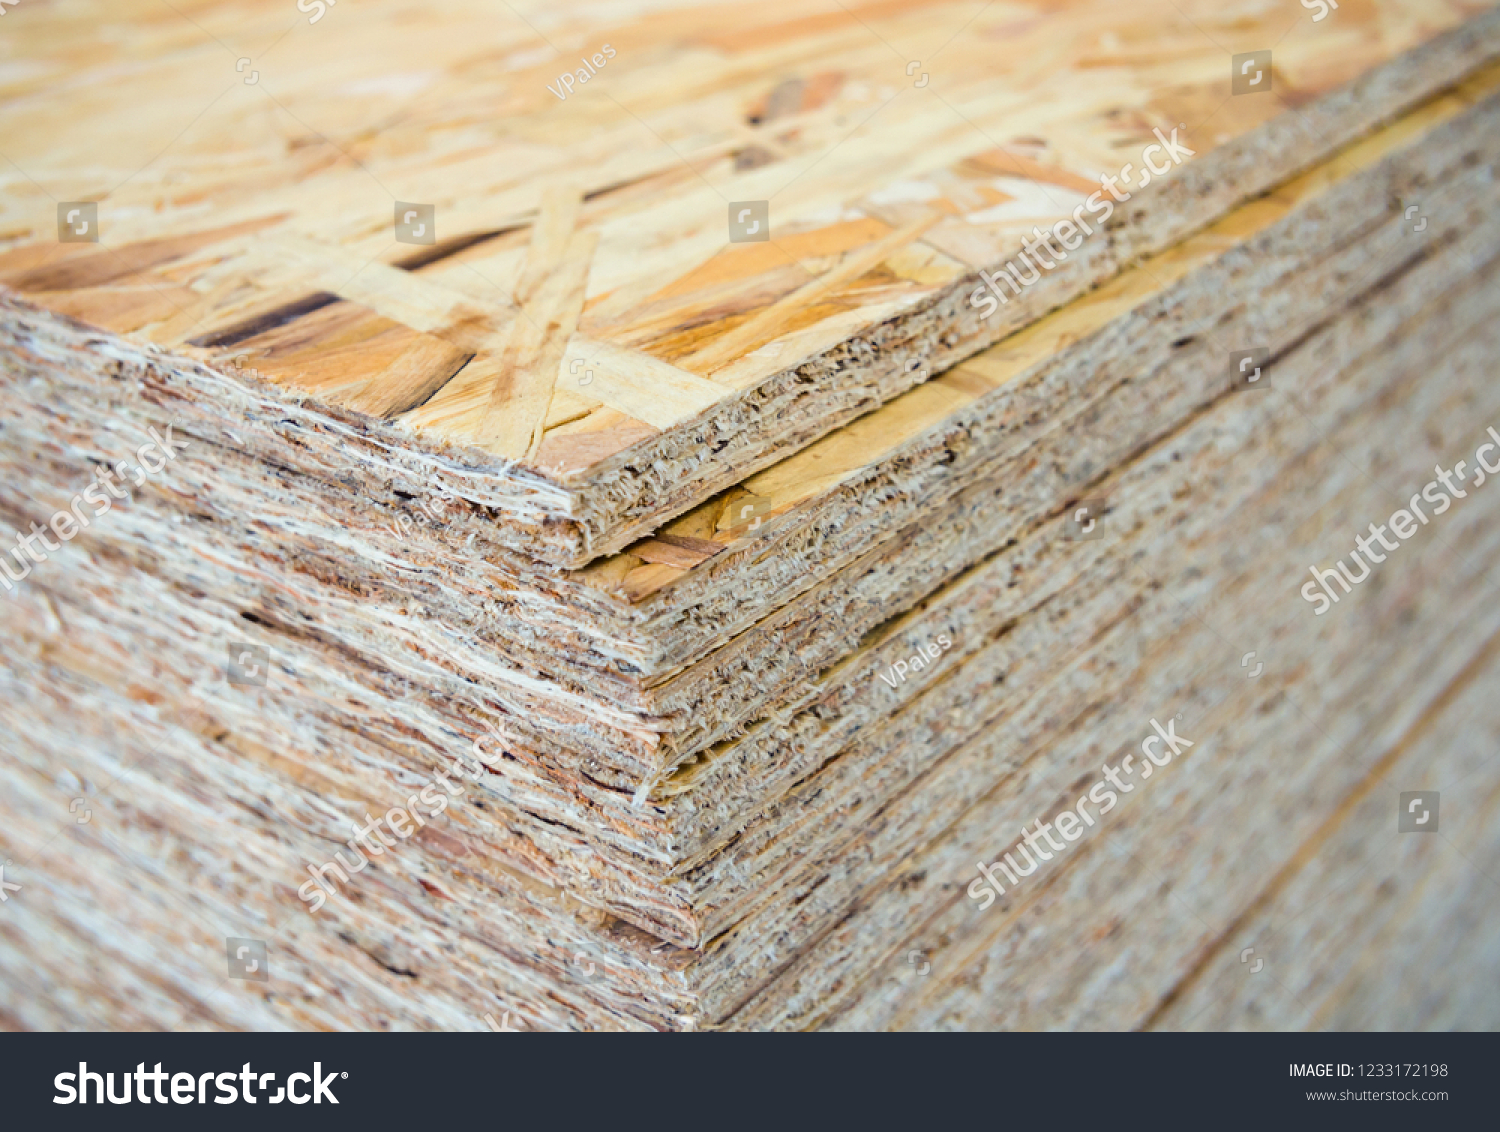 A stack of OSB sheets stacked one on another #1233172198